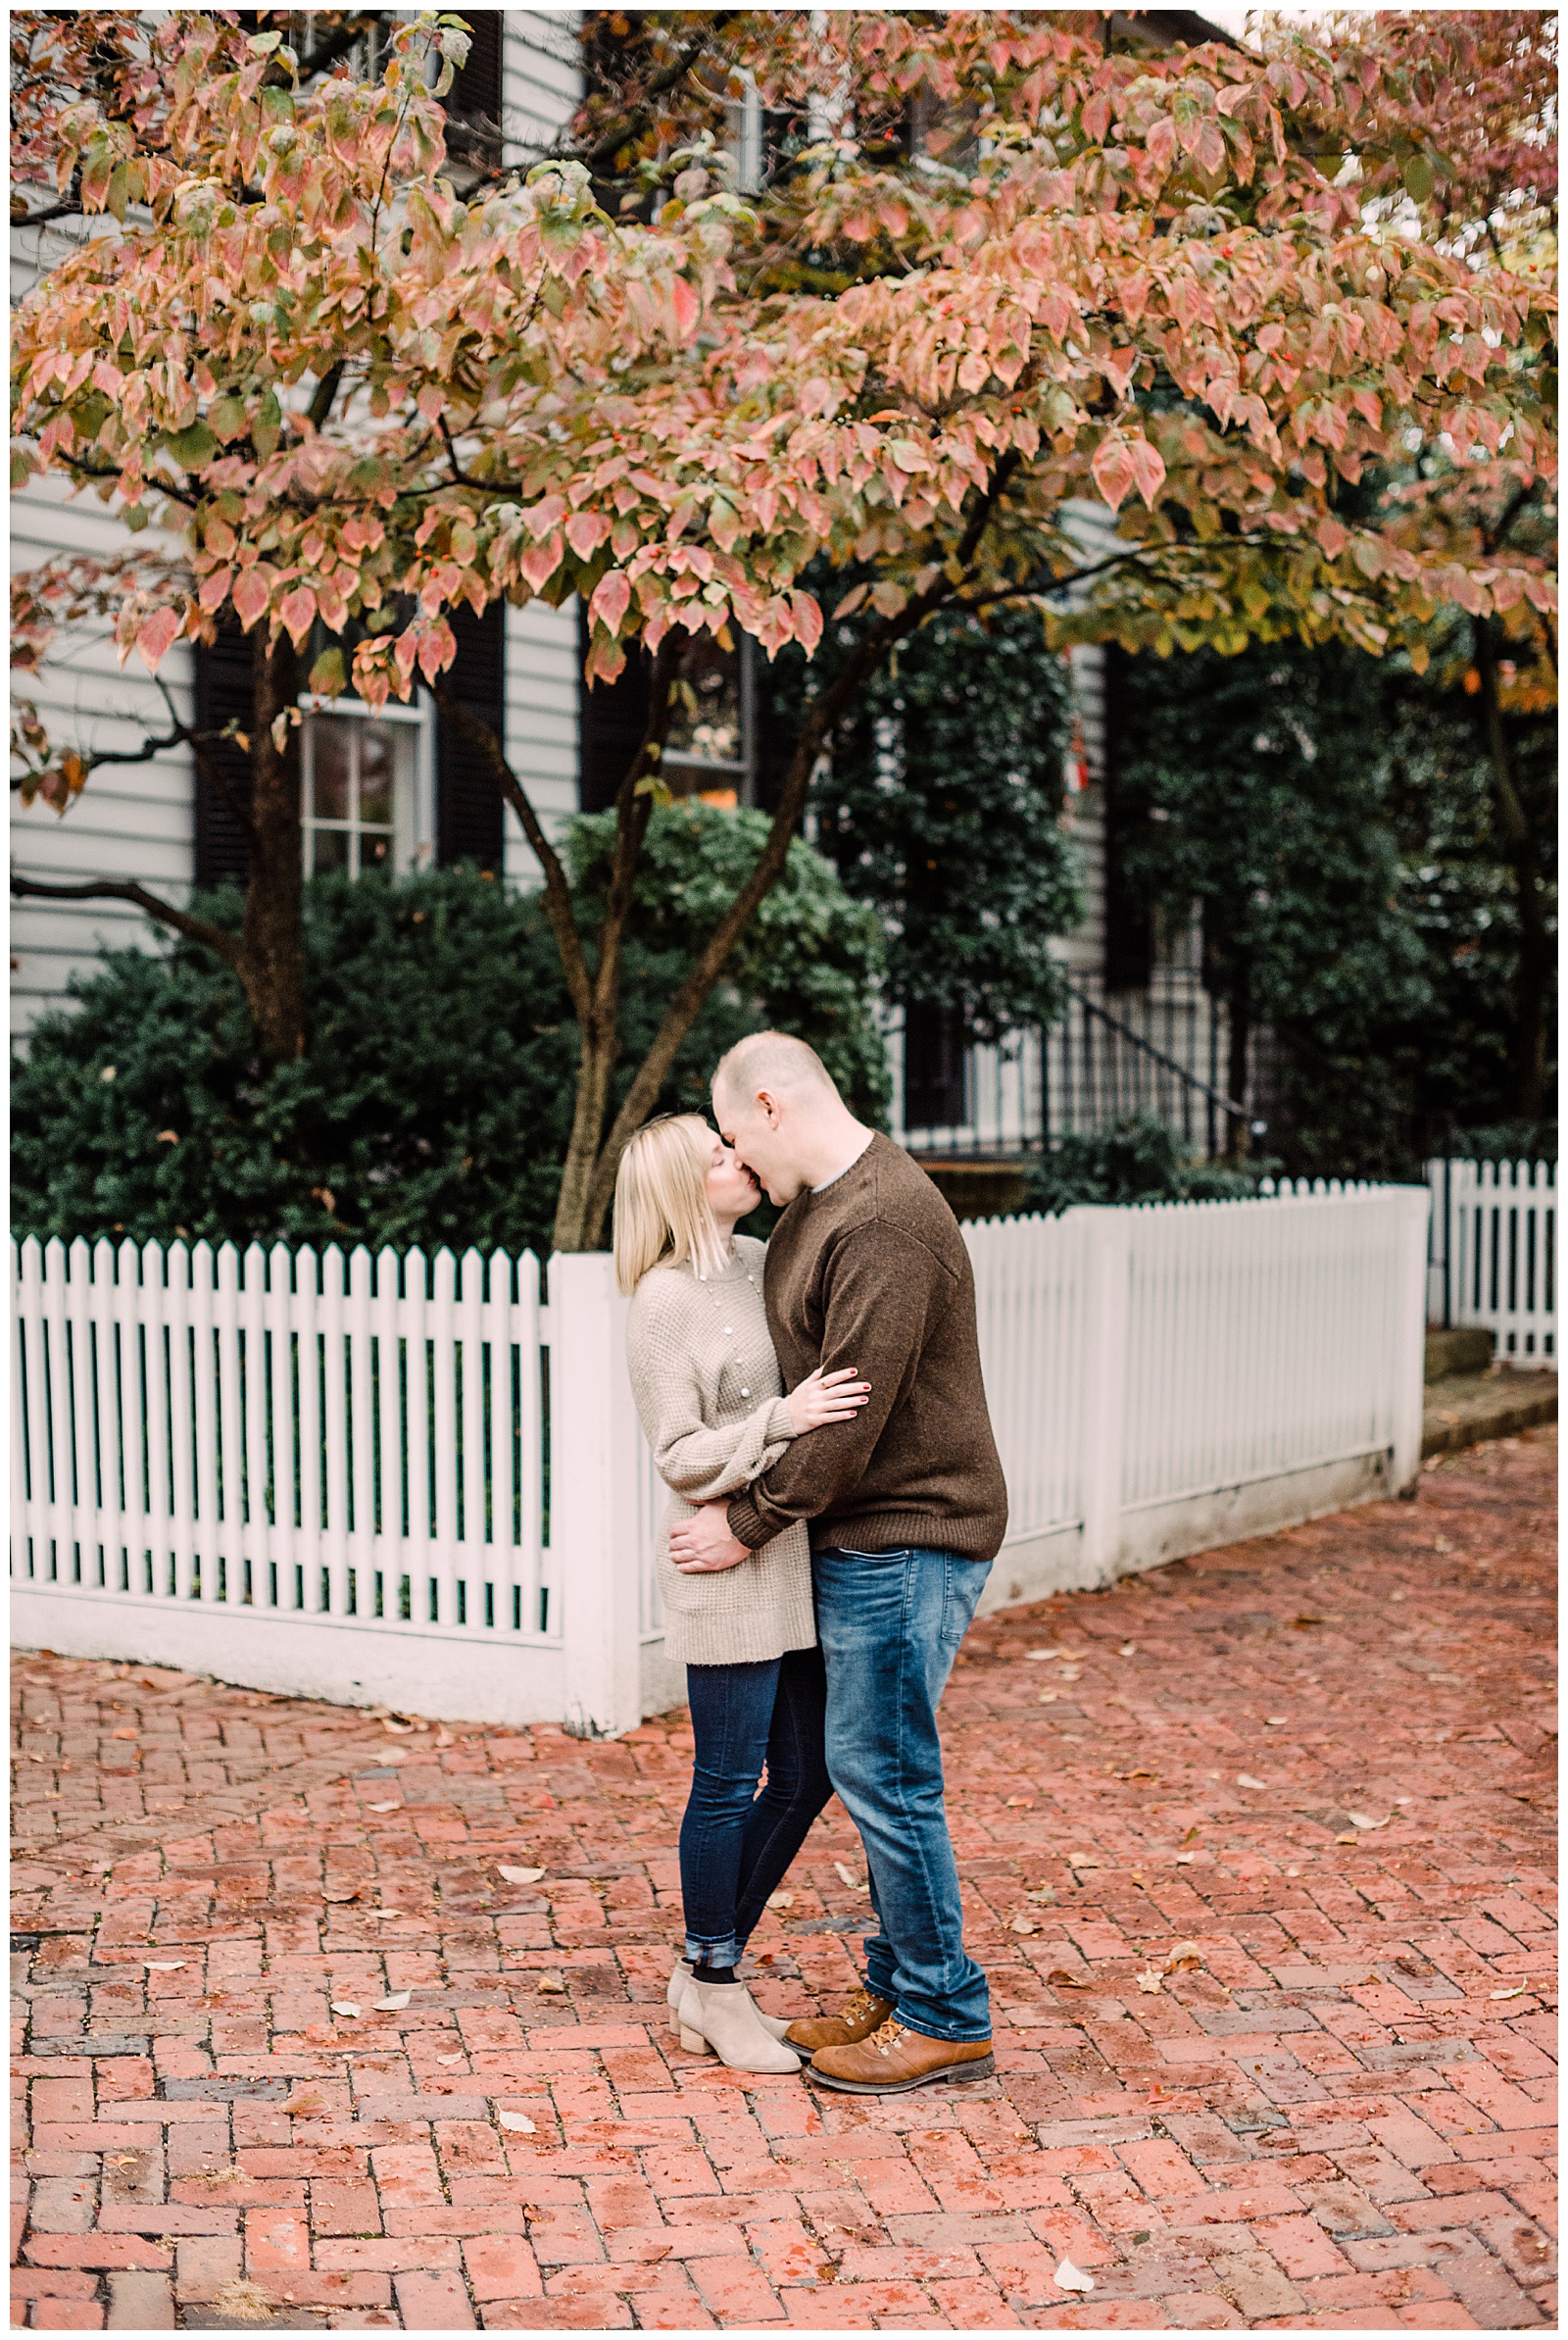 Old Town Alexandria Engagement Portraits by Kimberly F. Denn photo